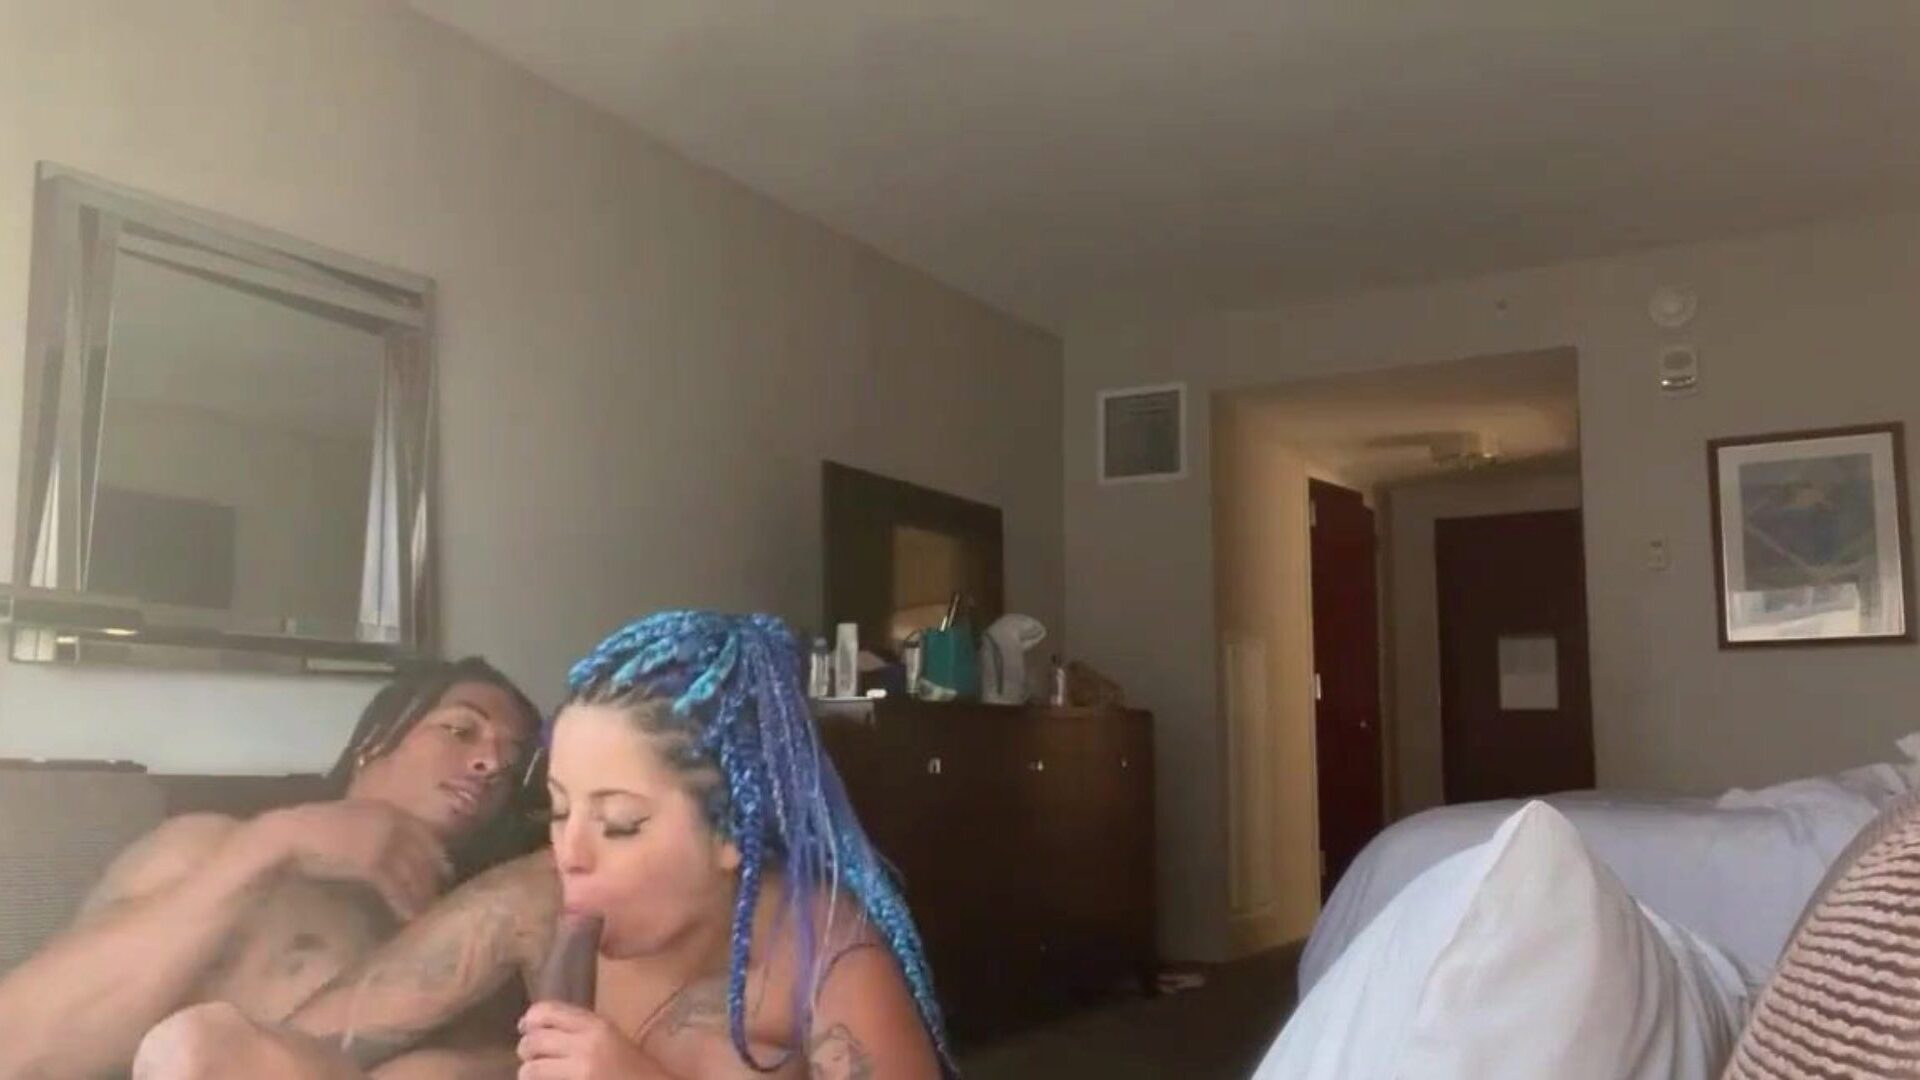 She’s been wanting Zaddy's ramrod to make her cum and spray